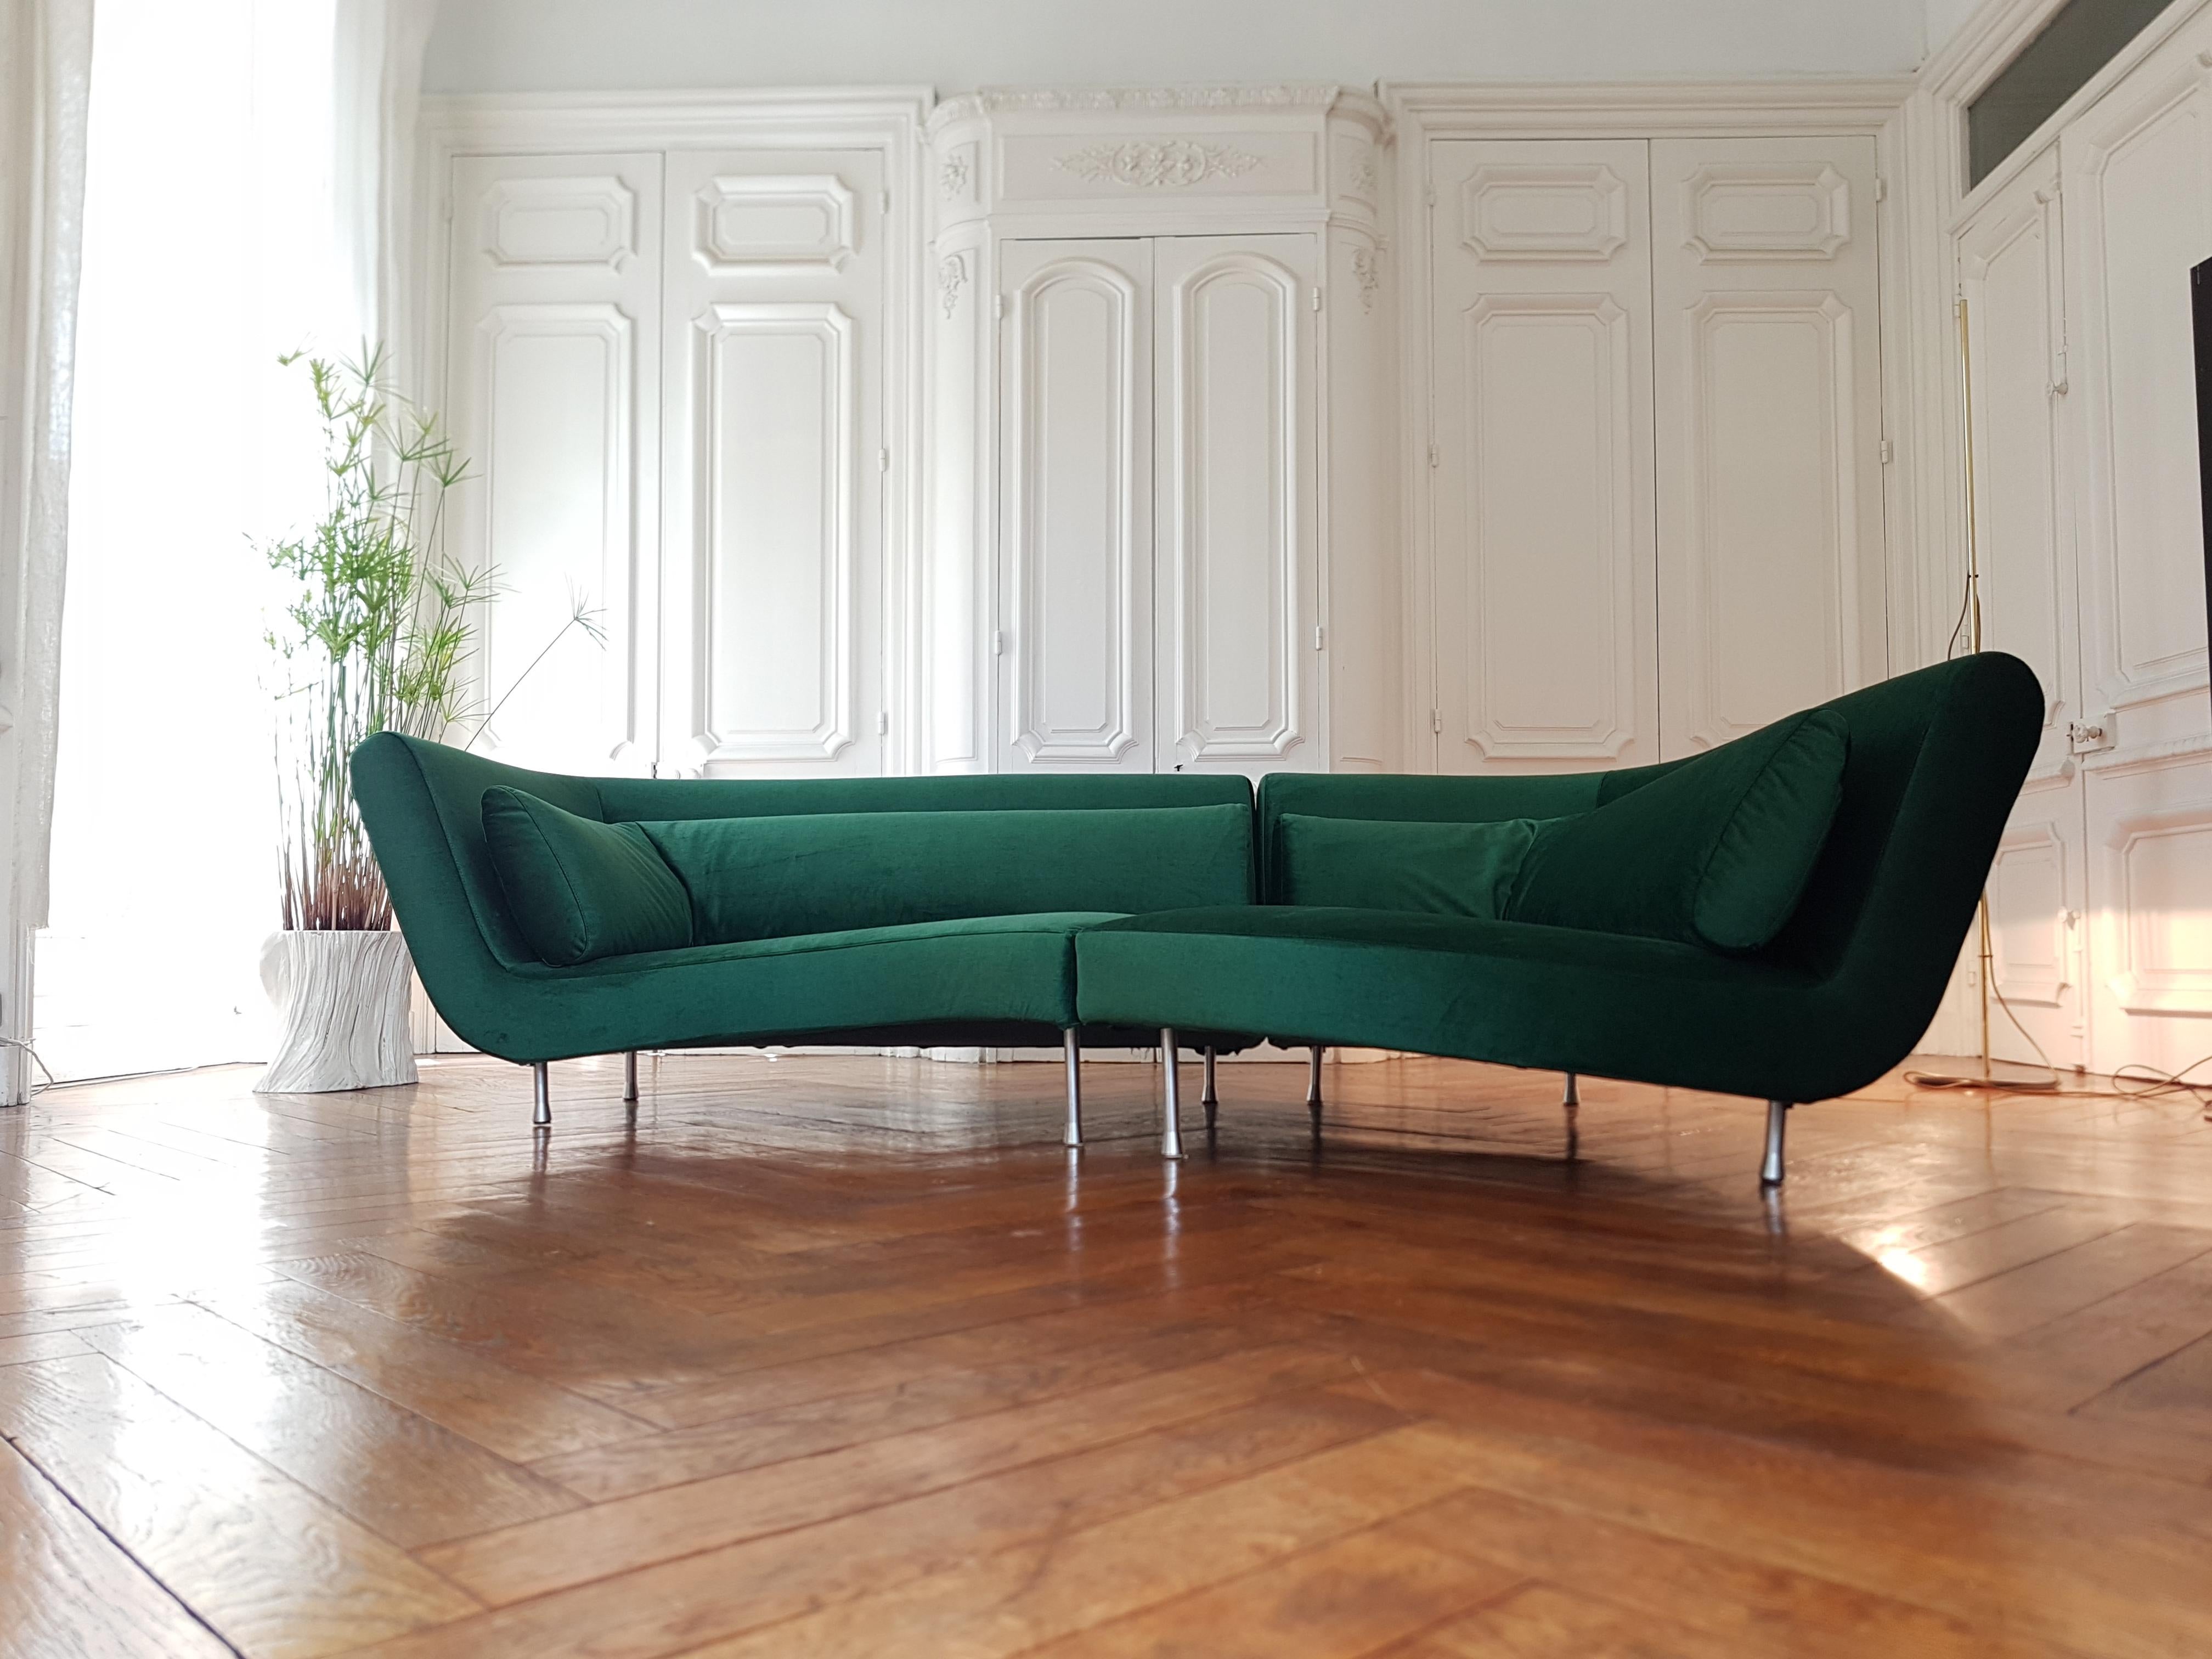 Two Yang Sofa Design Sofas by Francoi Boucher Cinna, Corner Sofa In Excellent Condition For Sale In Lyon, FR